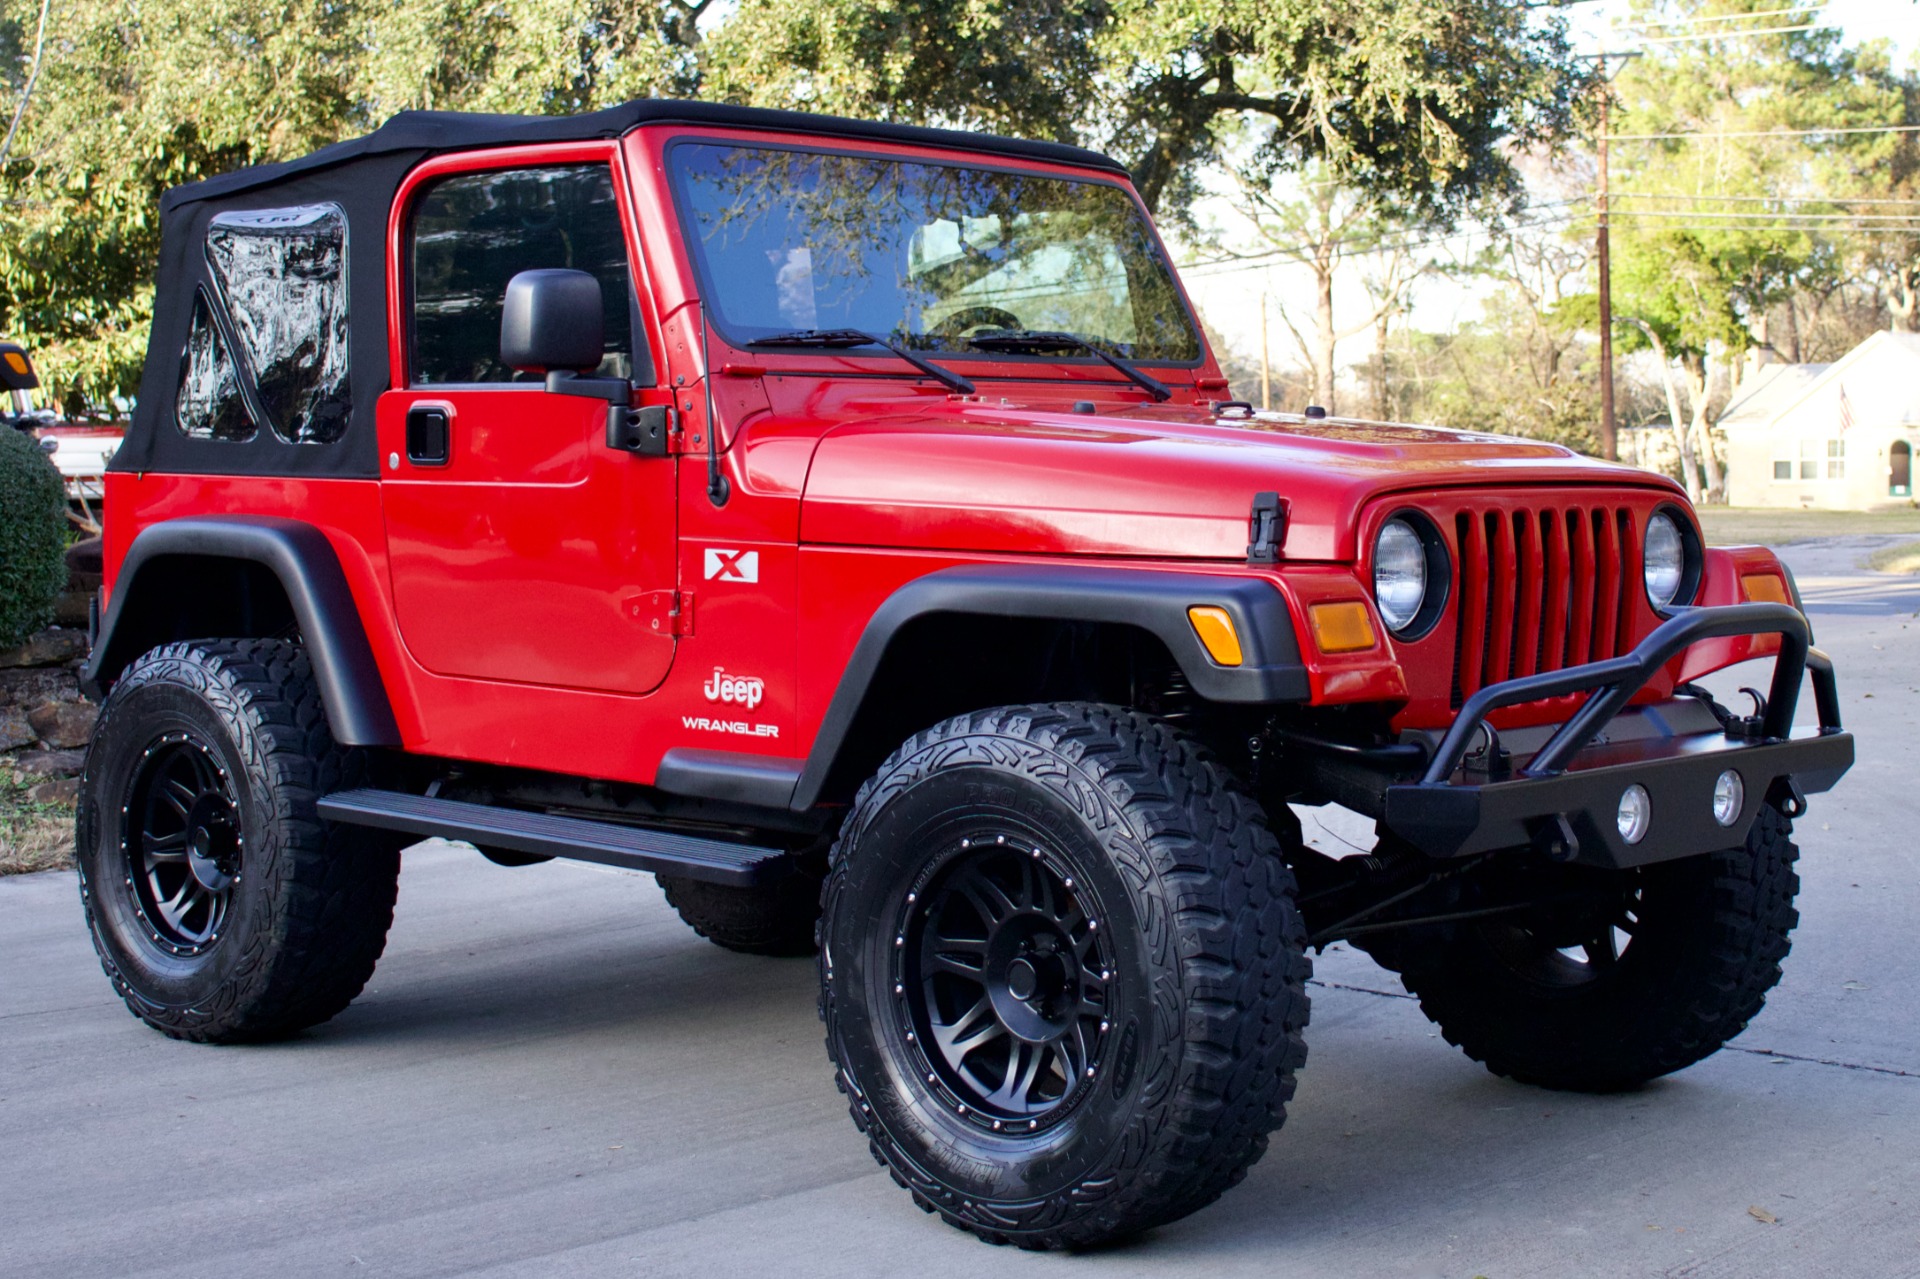 Used 2005 Jeep Wrangler X For Sale ($16,995) | Select Jeeps Inc. Stock  #387416